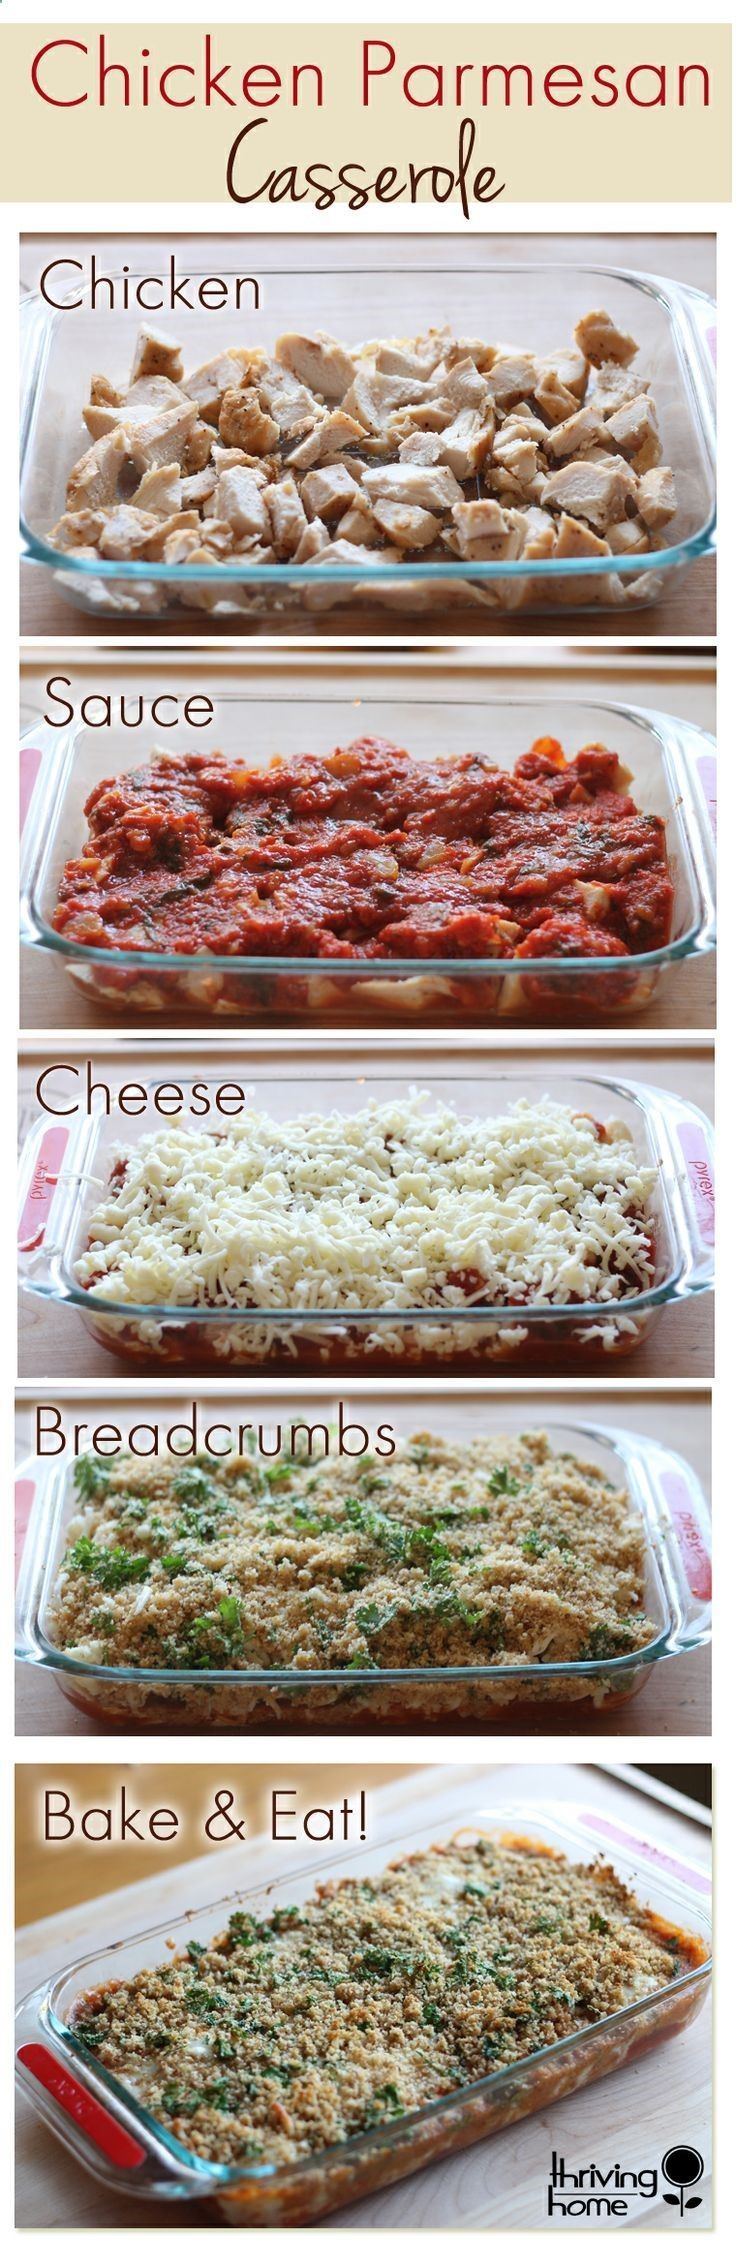 Chicken Parmesan Casserole Recipe @Jennifer Ramos (Note to self: Omit bread crumbs for low carb option)